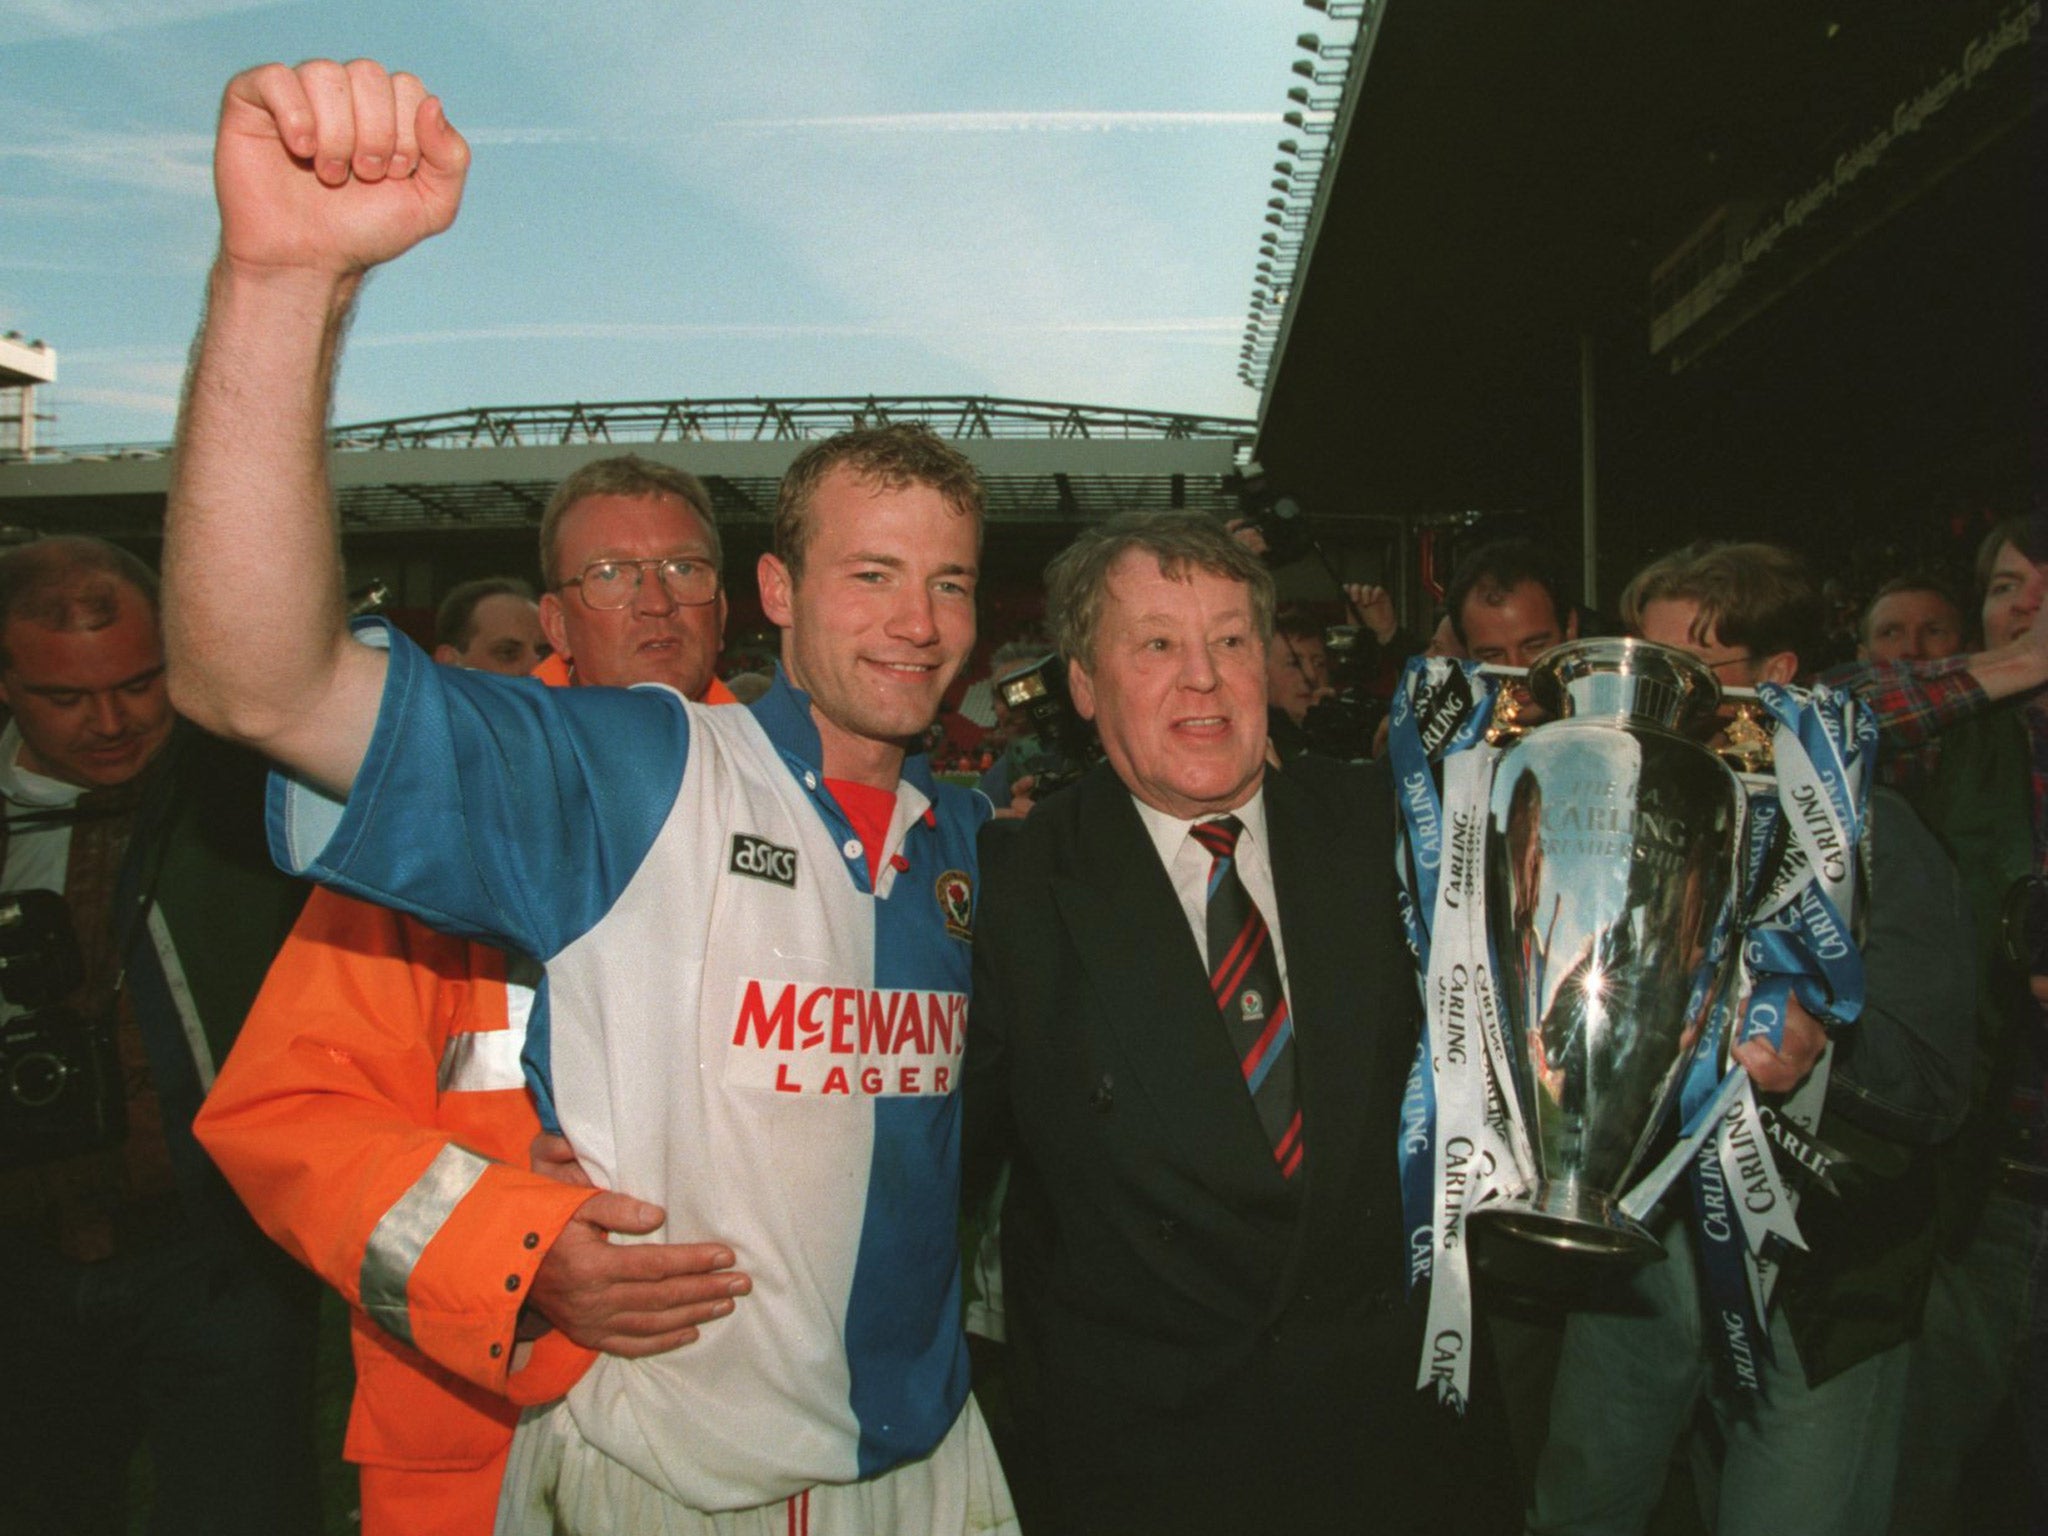 Jack Walker was the Premier League's first big-money owner who funded Blackburn Rovers' rise to the title in 1995